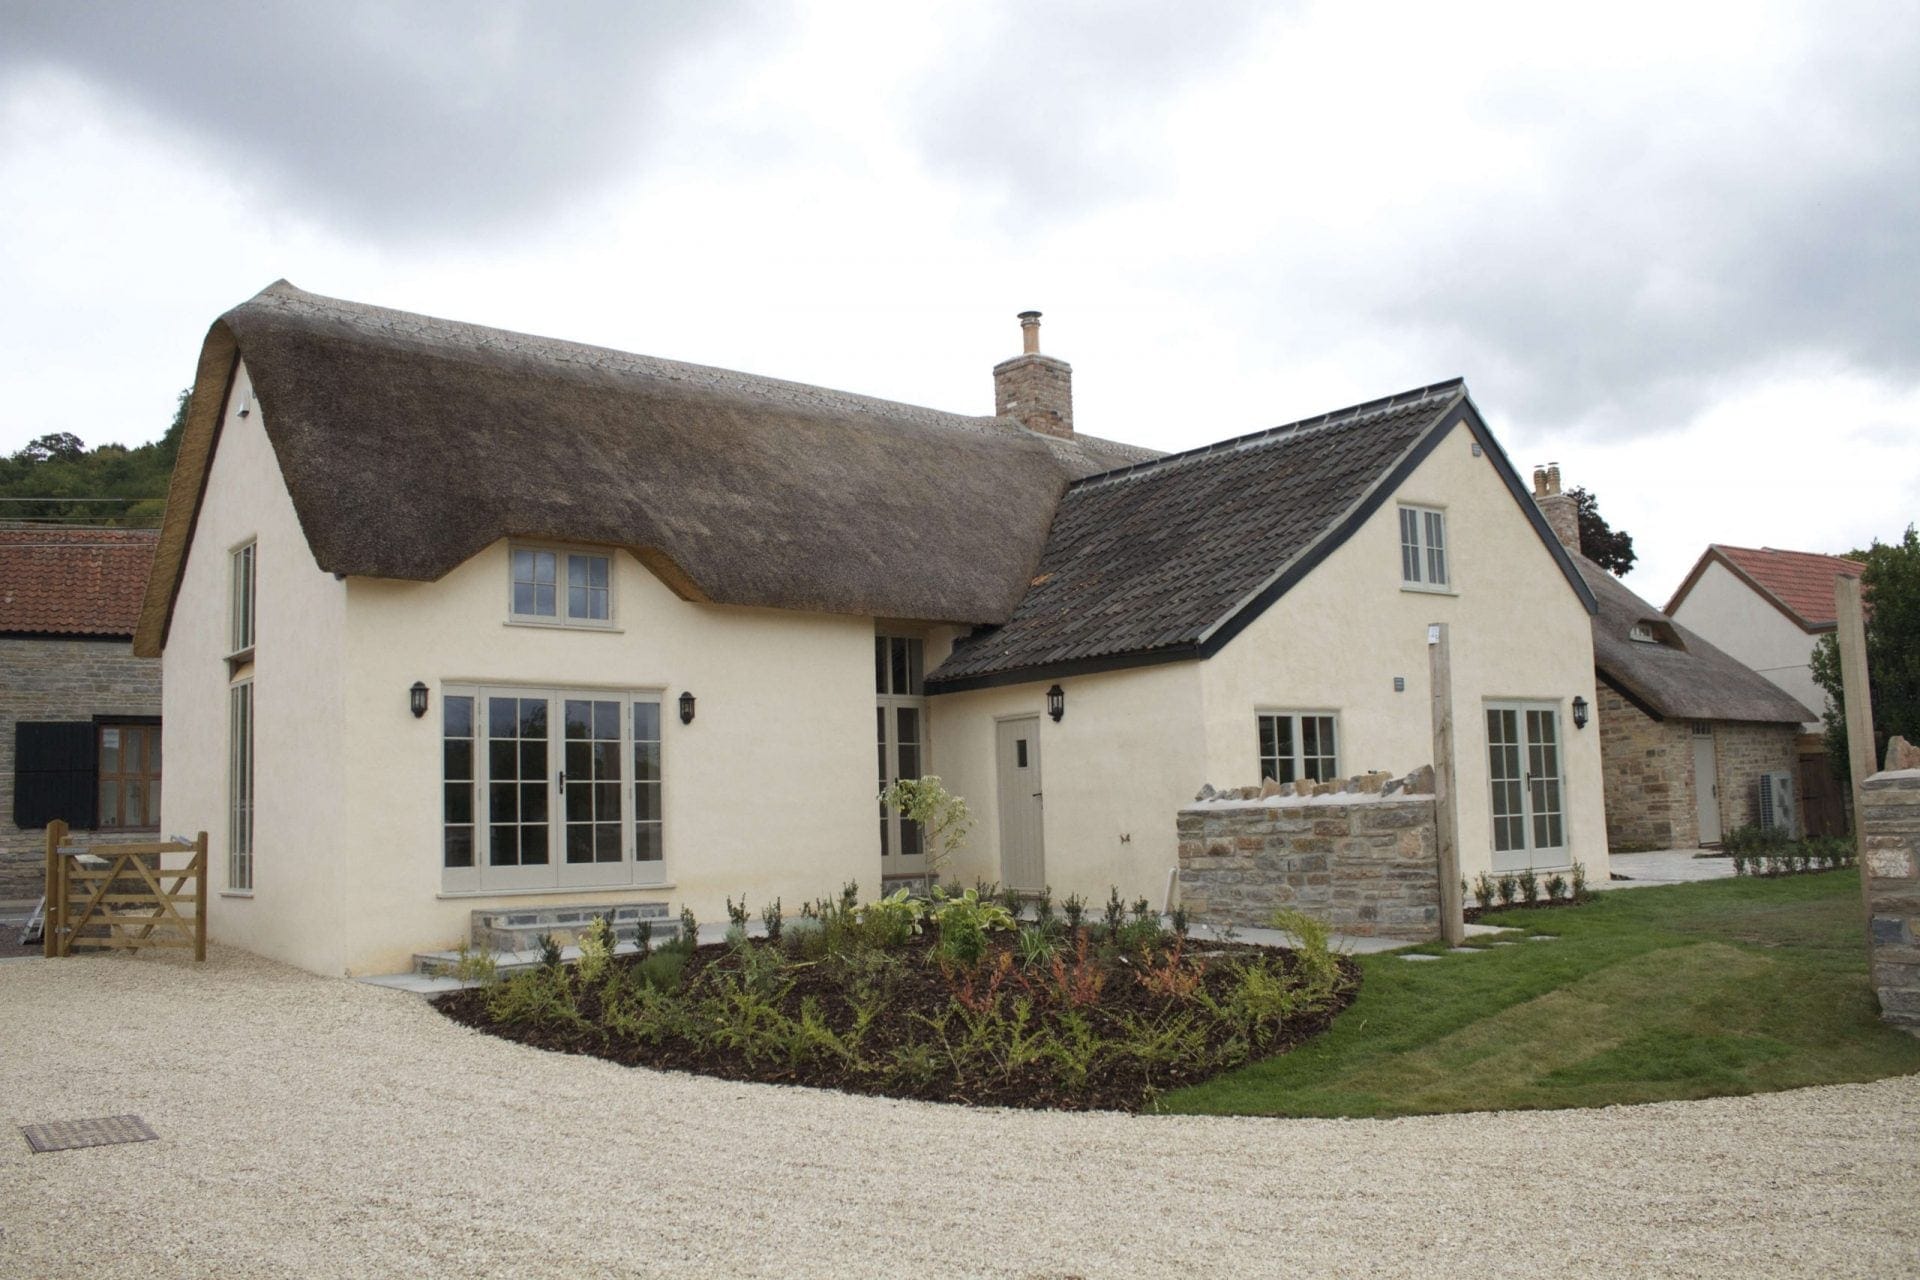 New Build, Renovation, Tythe barn, Extension, local builder